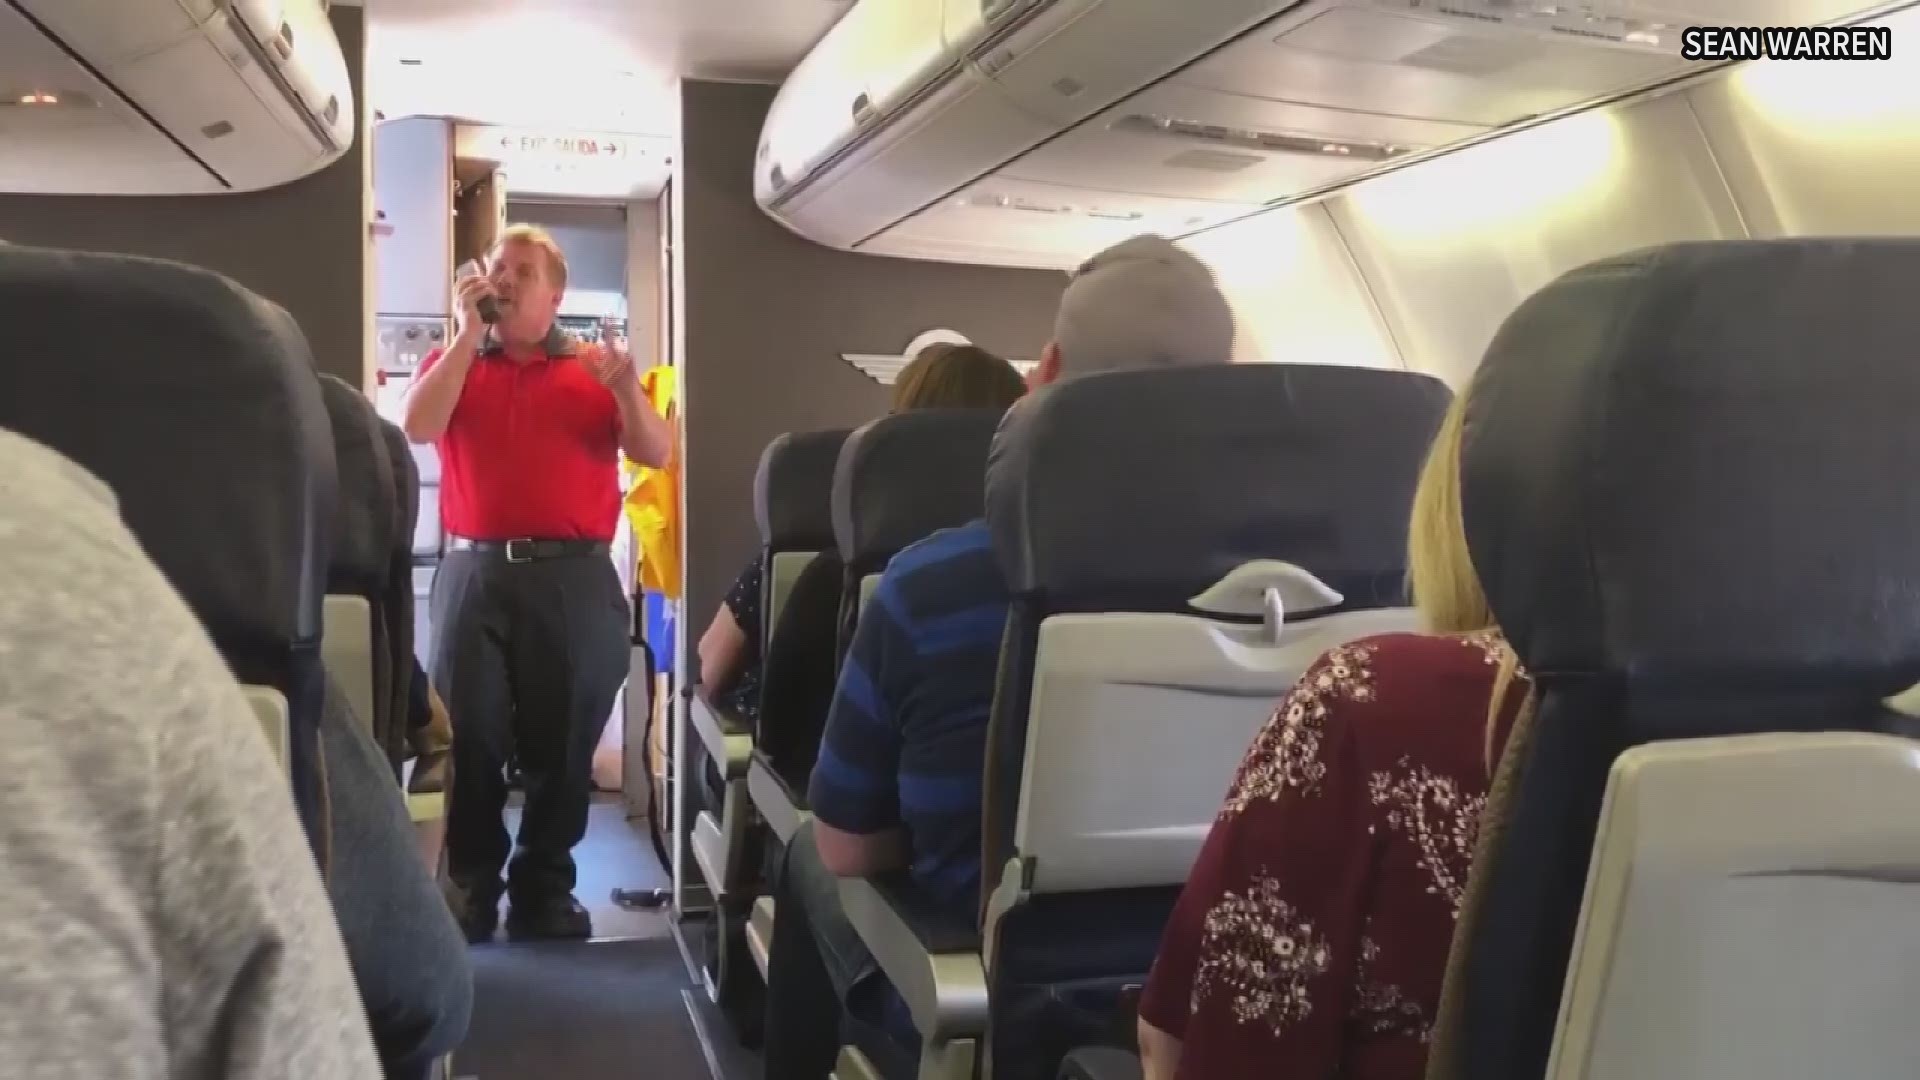 Sean Warren was a passenger on the flight and captured the moment as a Southwest employee began singing "You Raise Me Up" to her over the intercom.